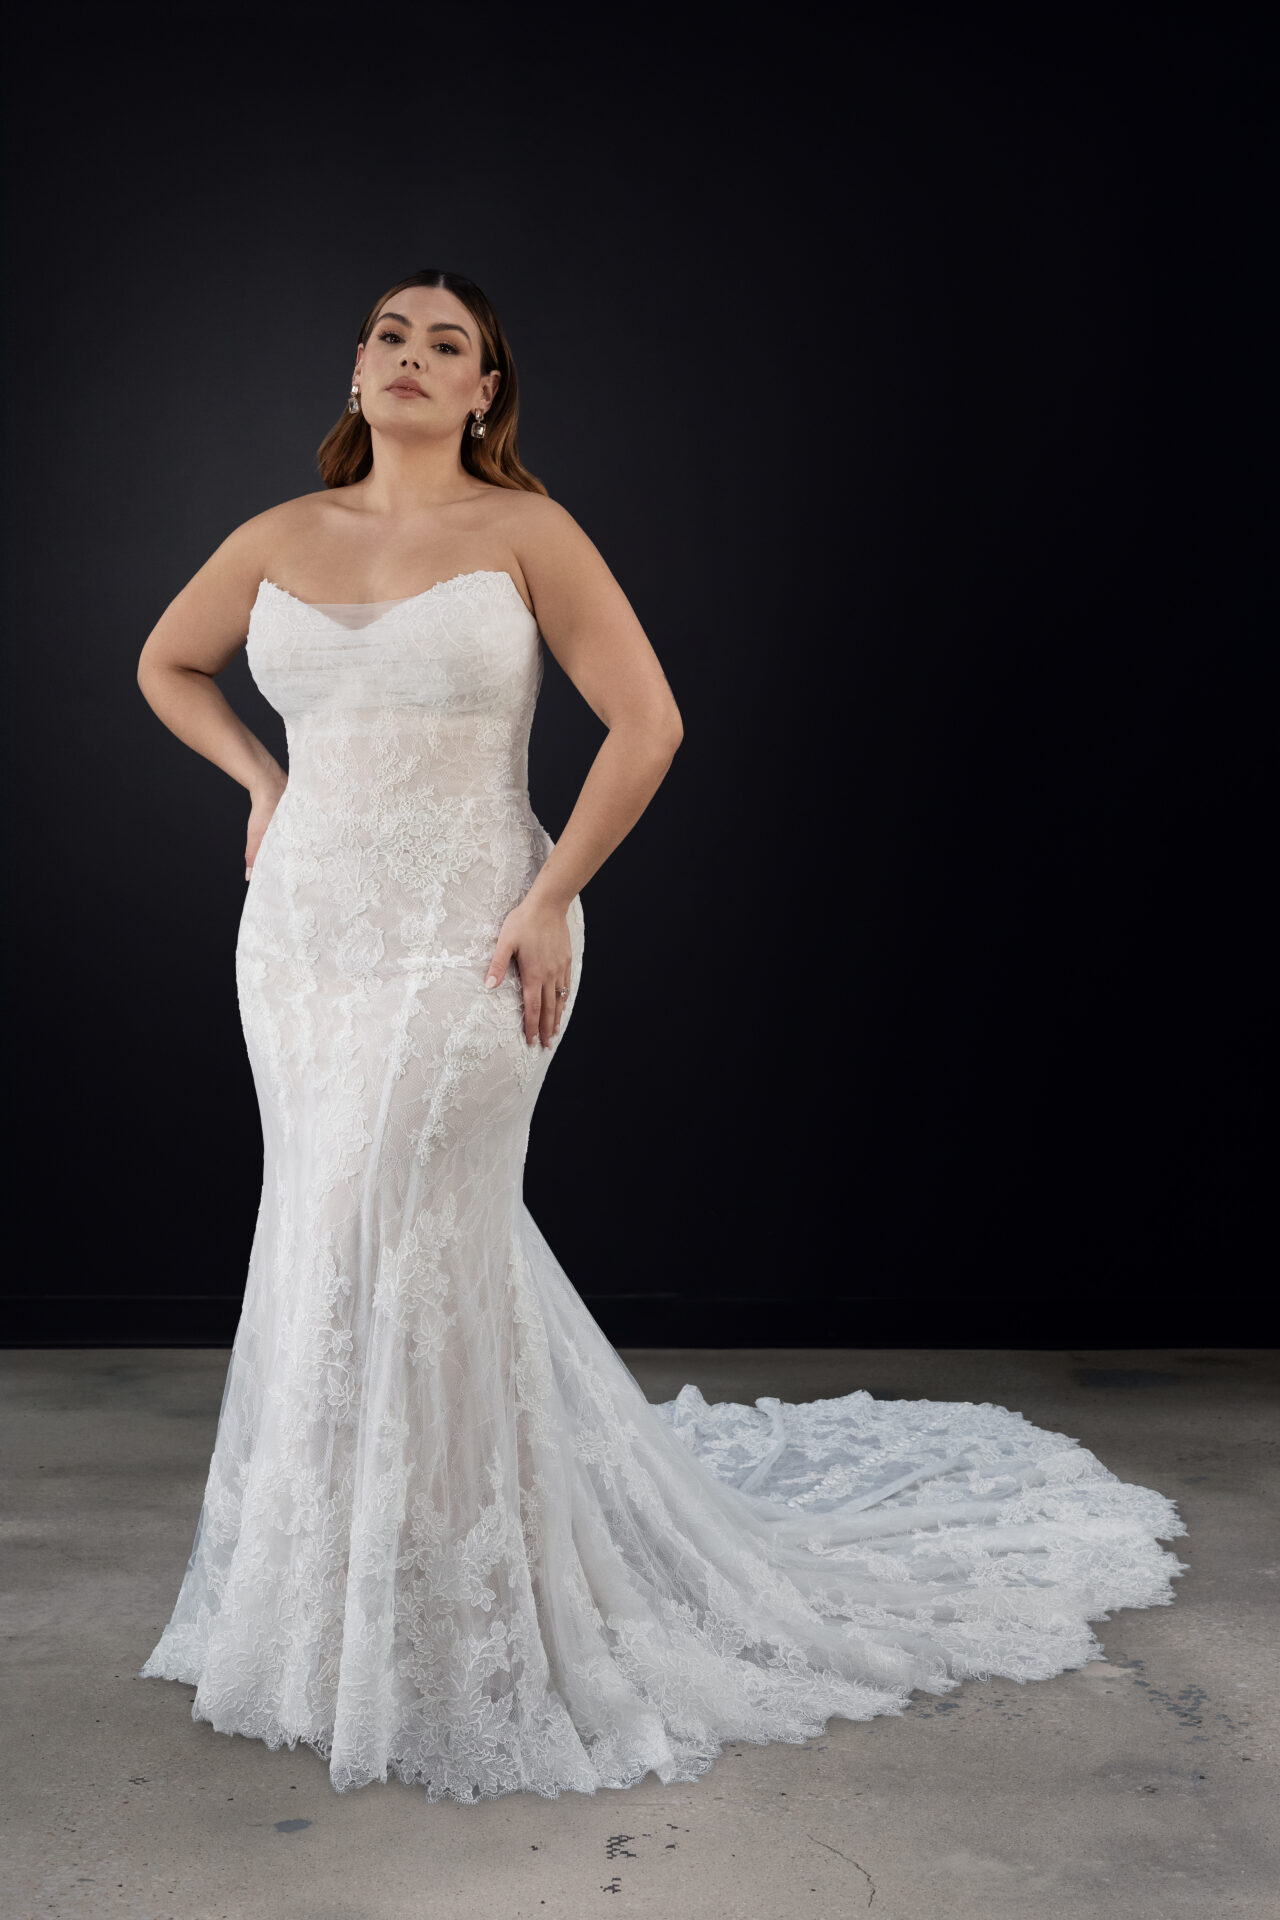 Plus Size Chic And Romantic Lace Fit-and-Flare Wedding Dress With Detachable Sleeves by Martina Liana - Image 1